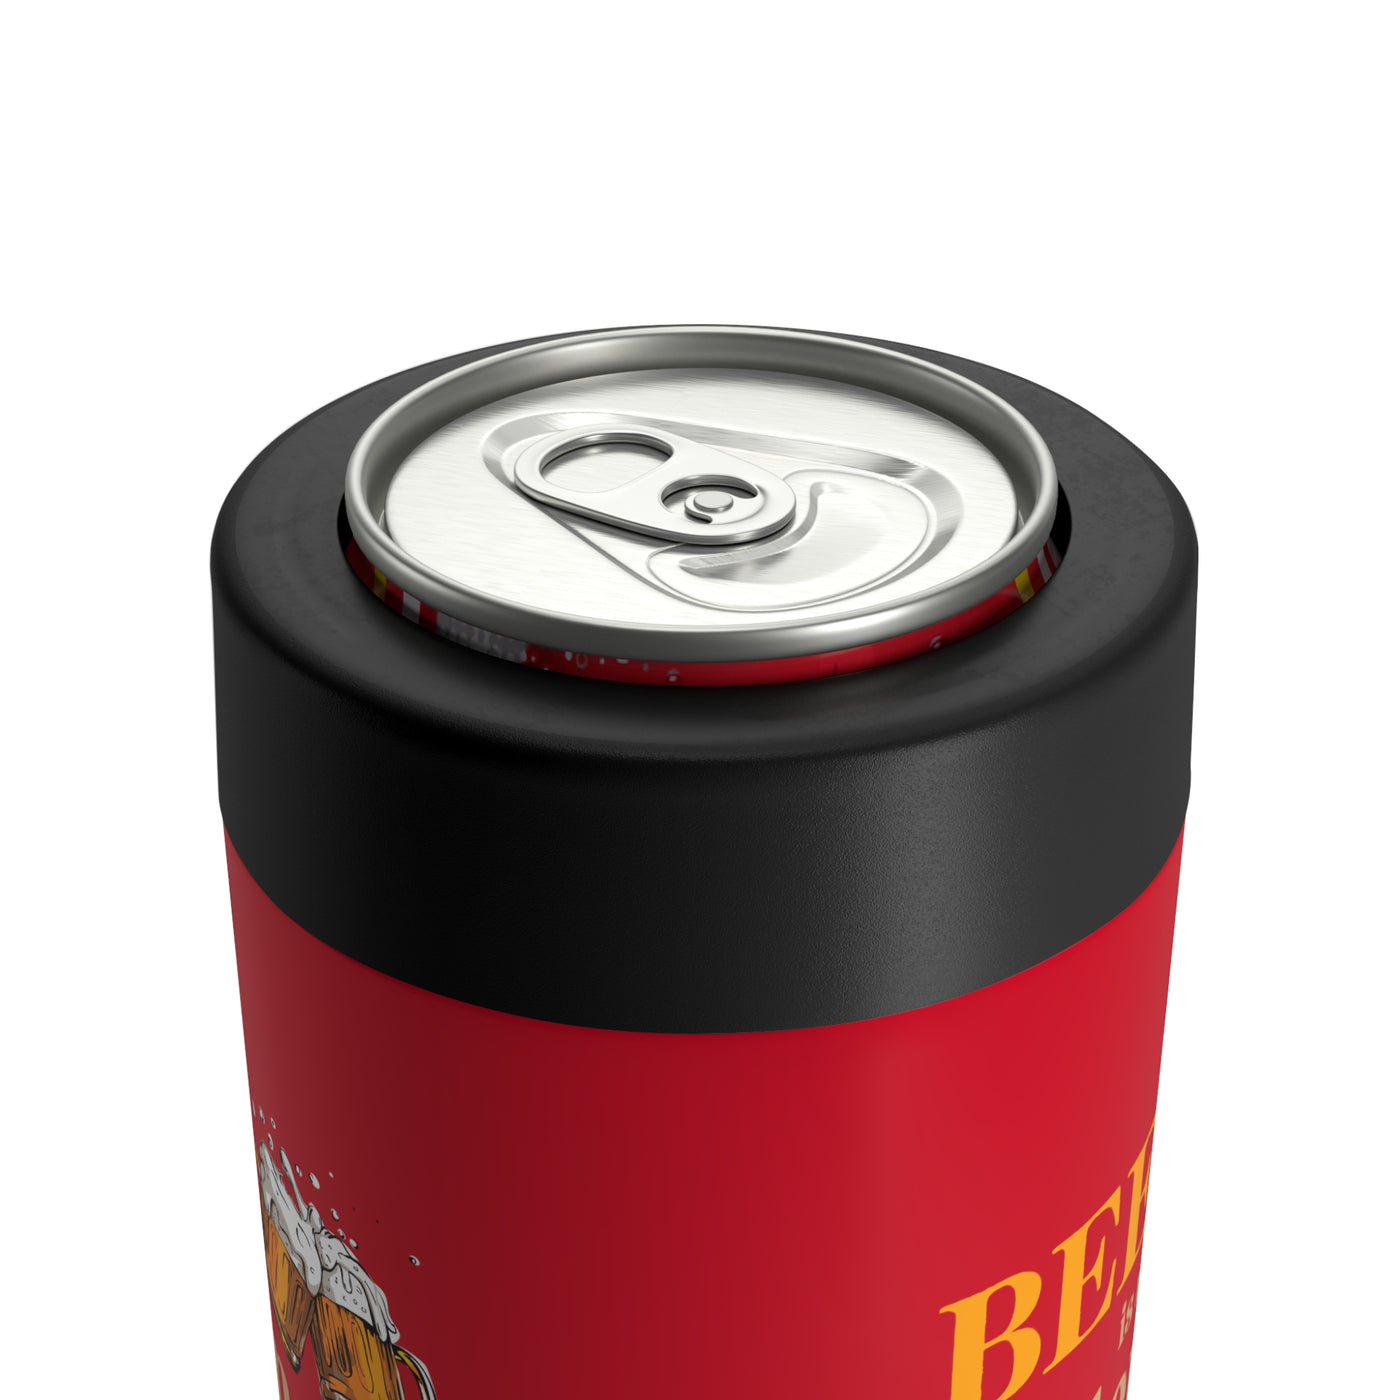 Beer Is My Valentine Stainless Steel Can Holder